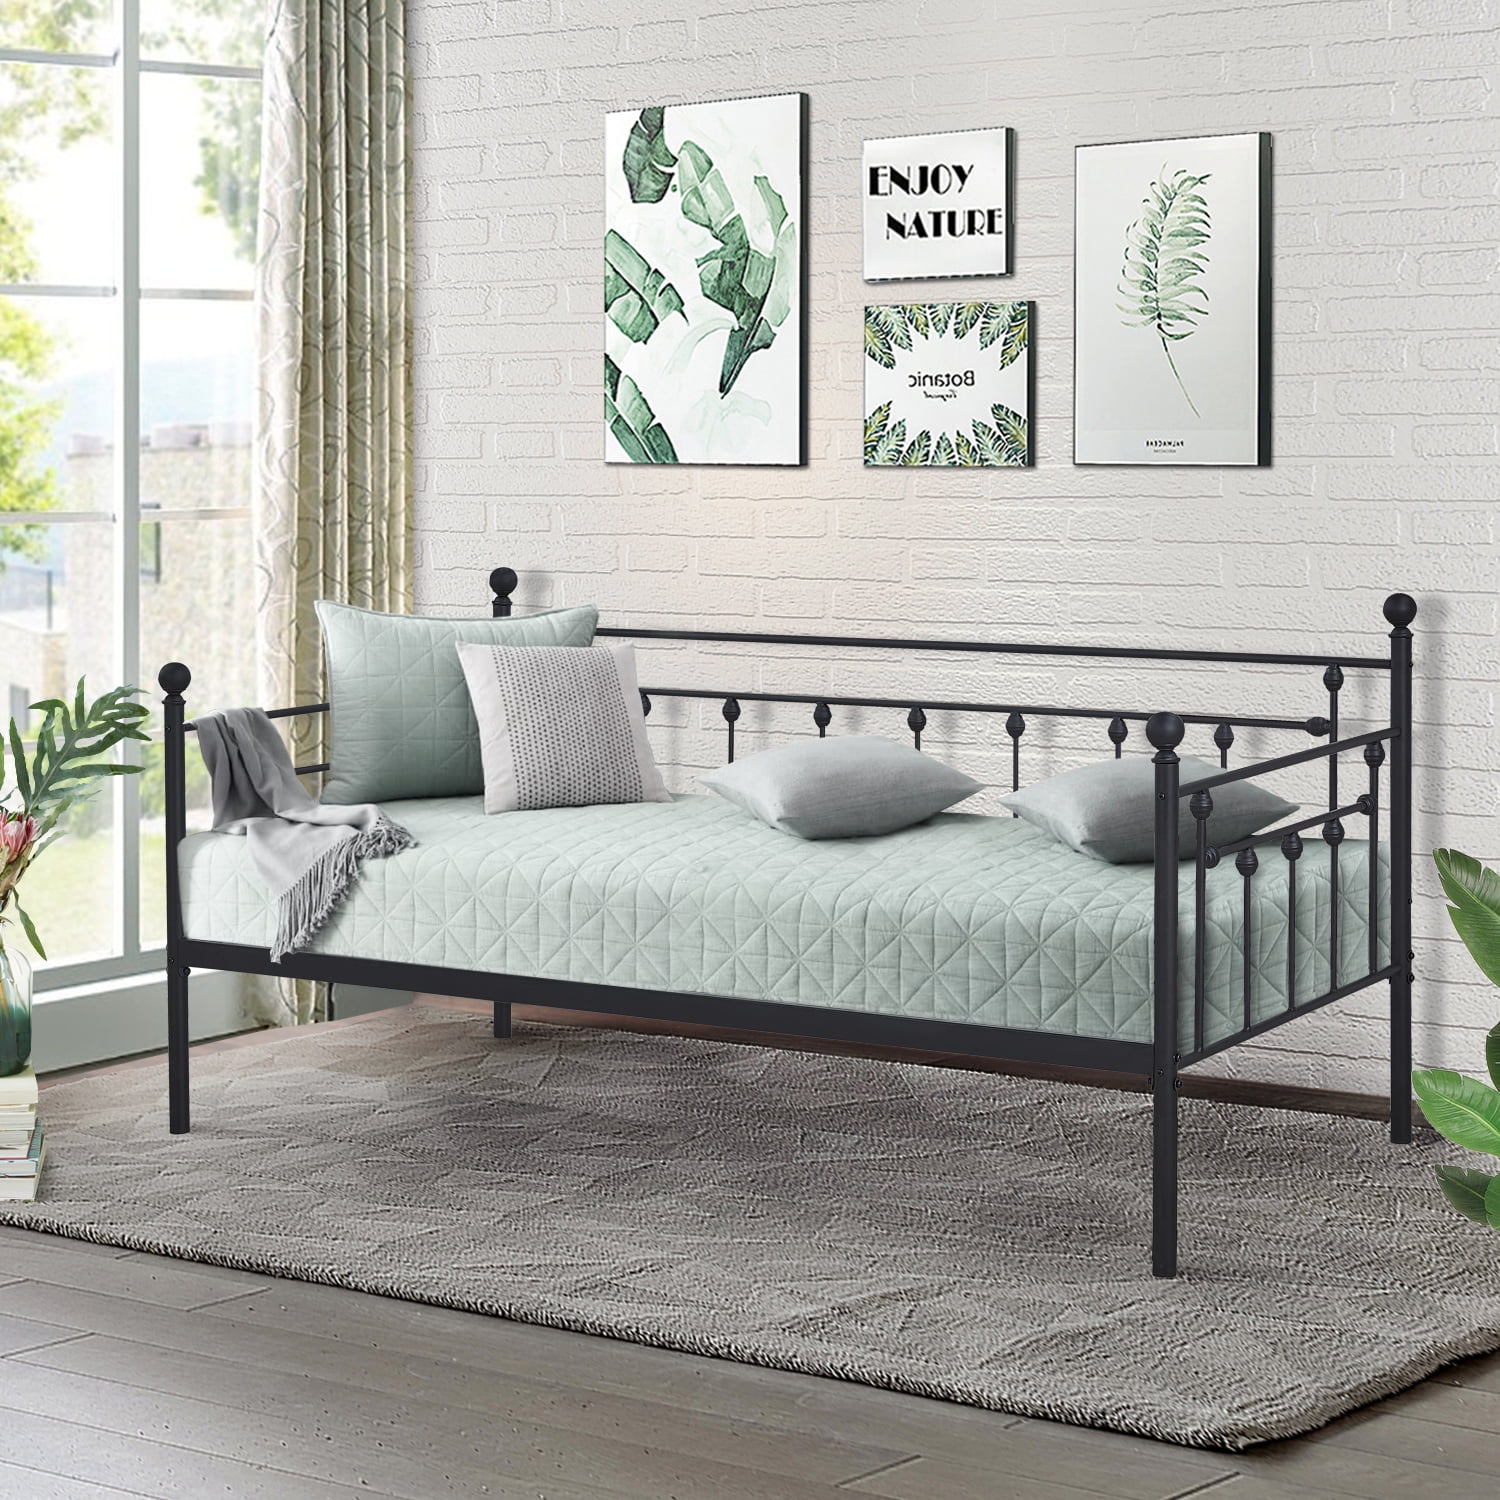 Metal Daybed Frame With Under-bed Storage，Twin Size,Black - Walmart.com